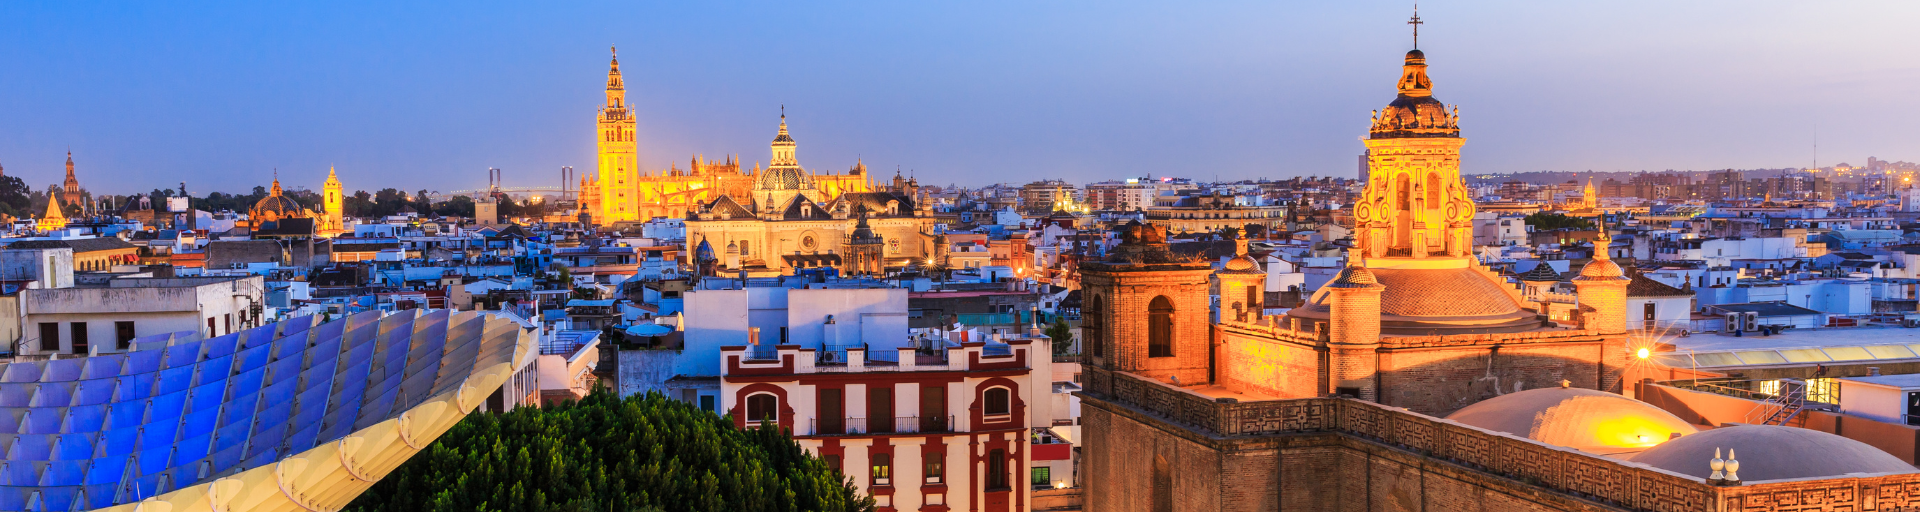 A view of Seville on the Global Network Program